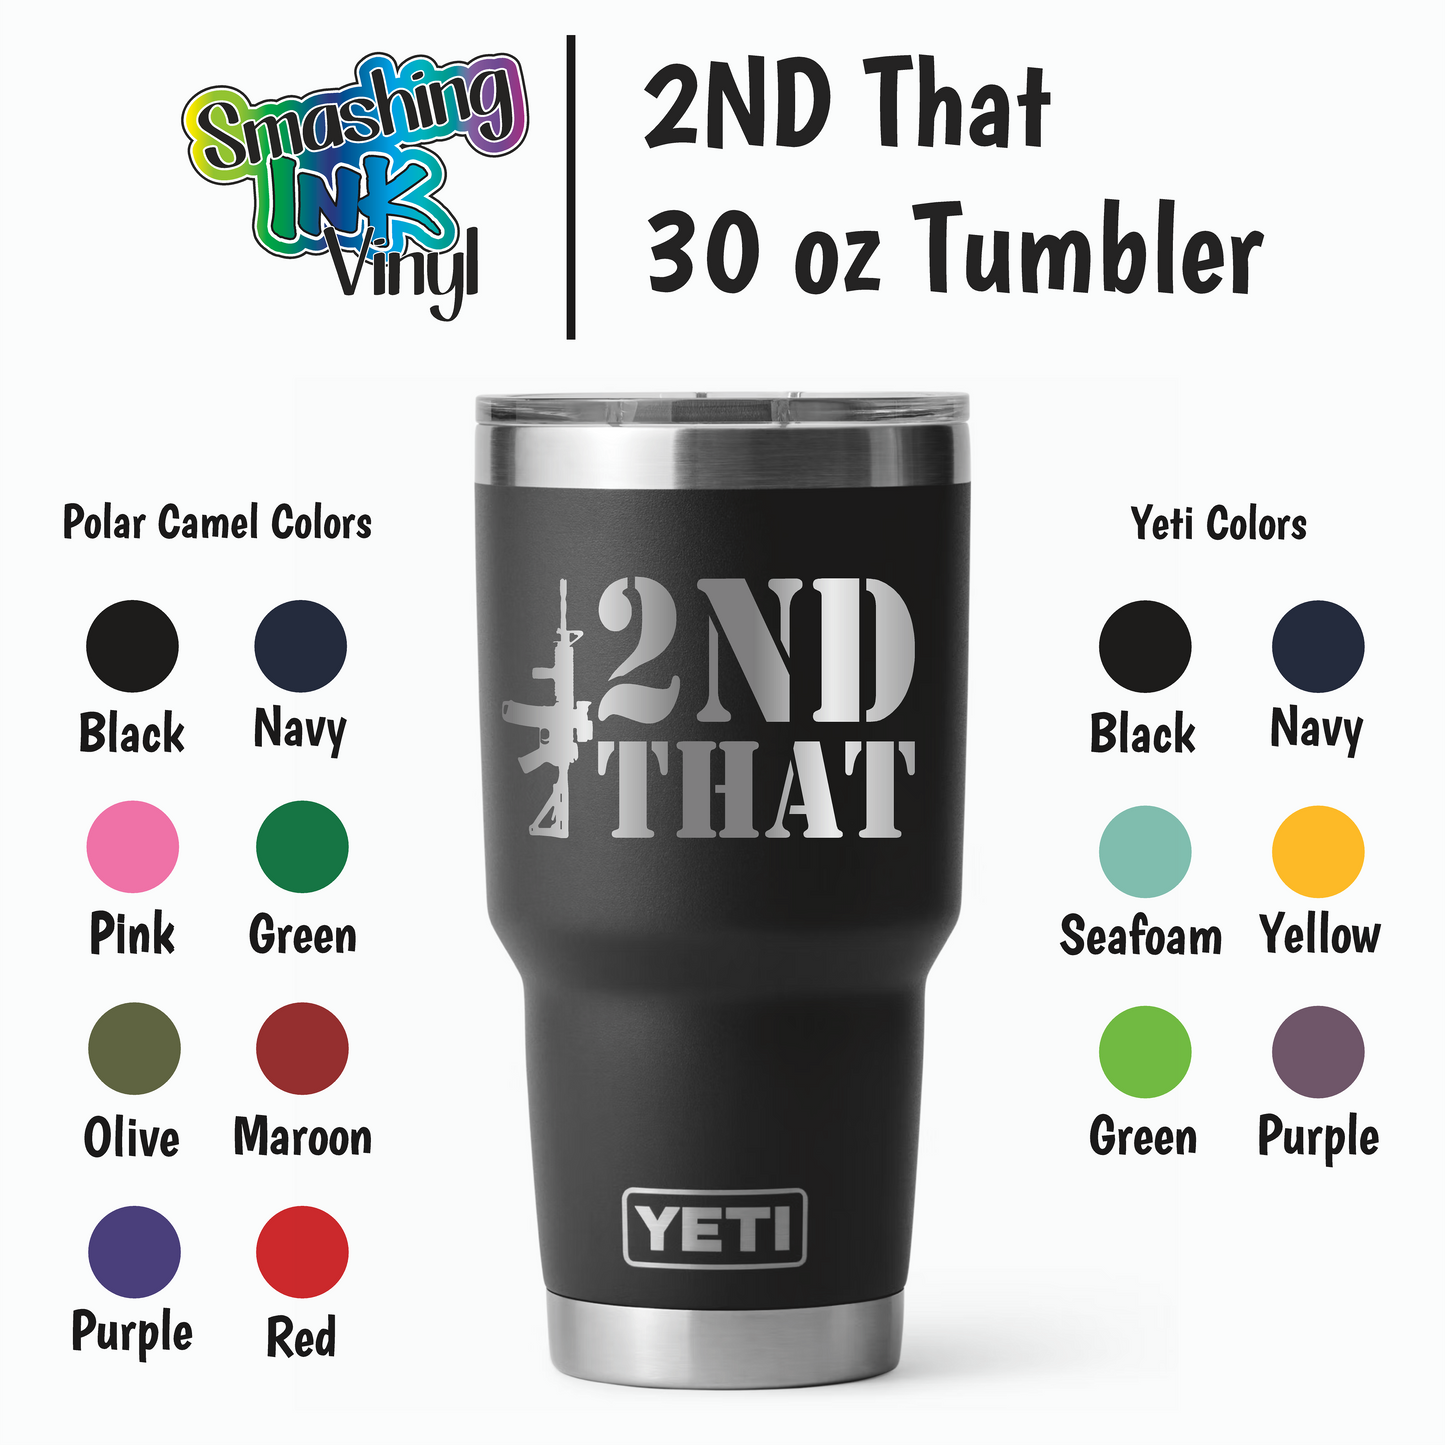 2ND That - Engraved Tumblers